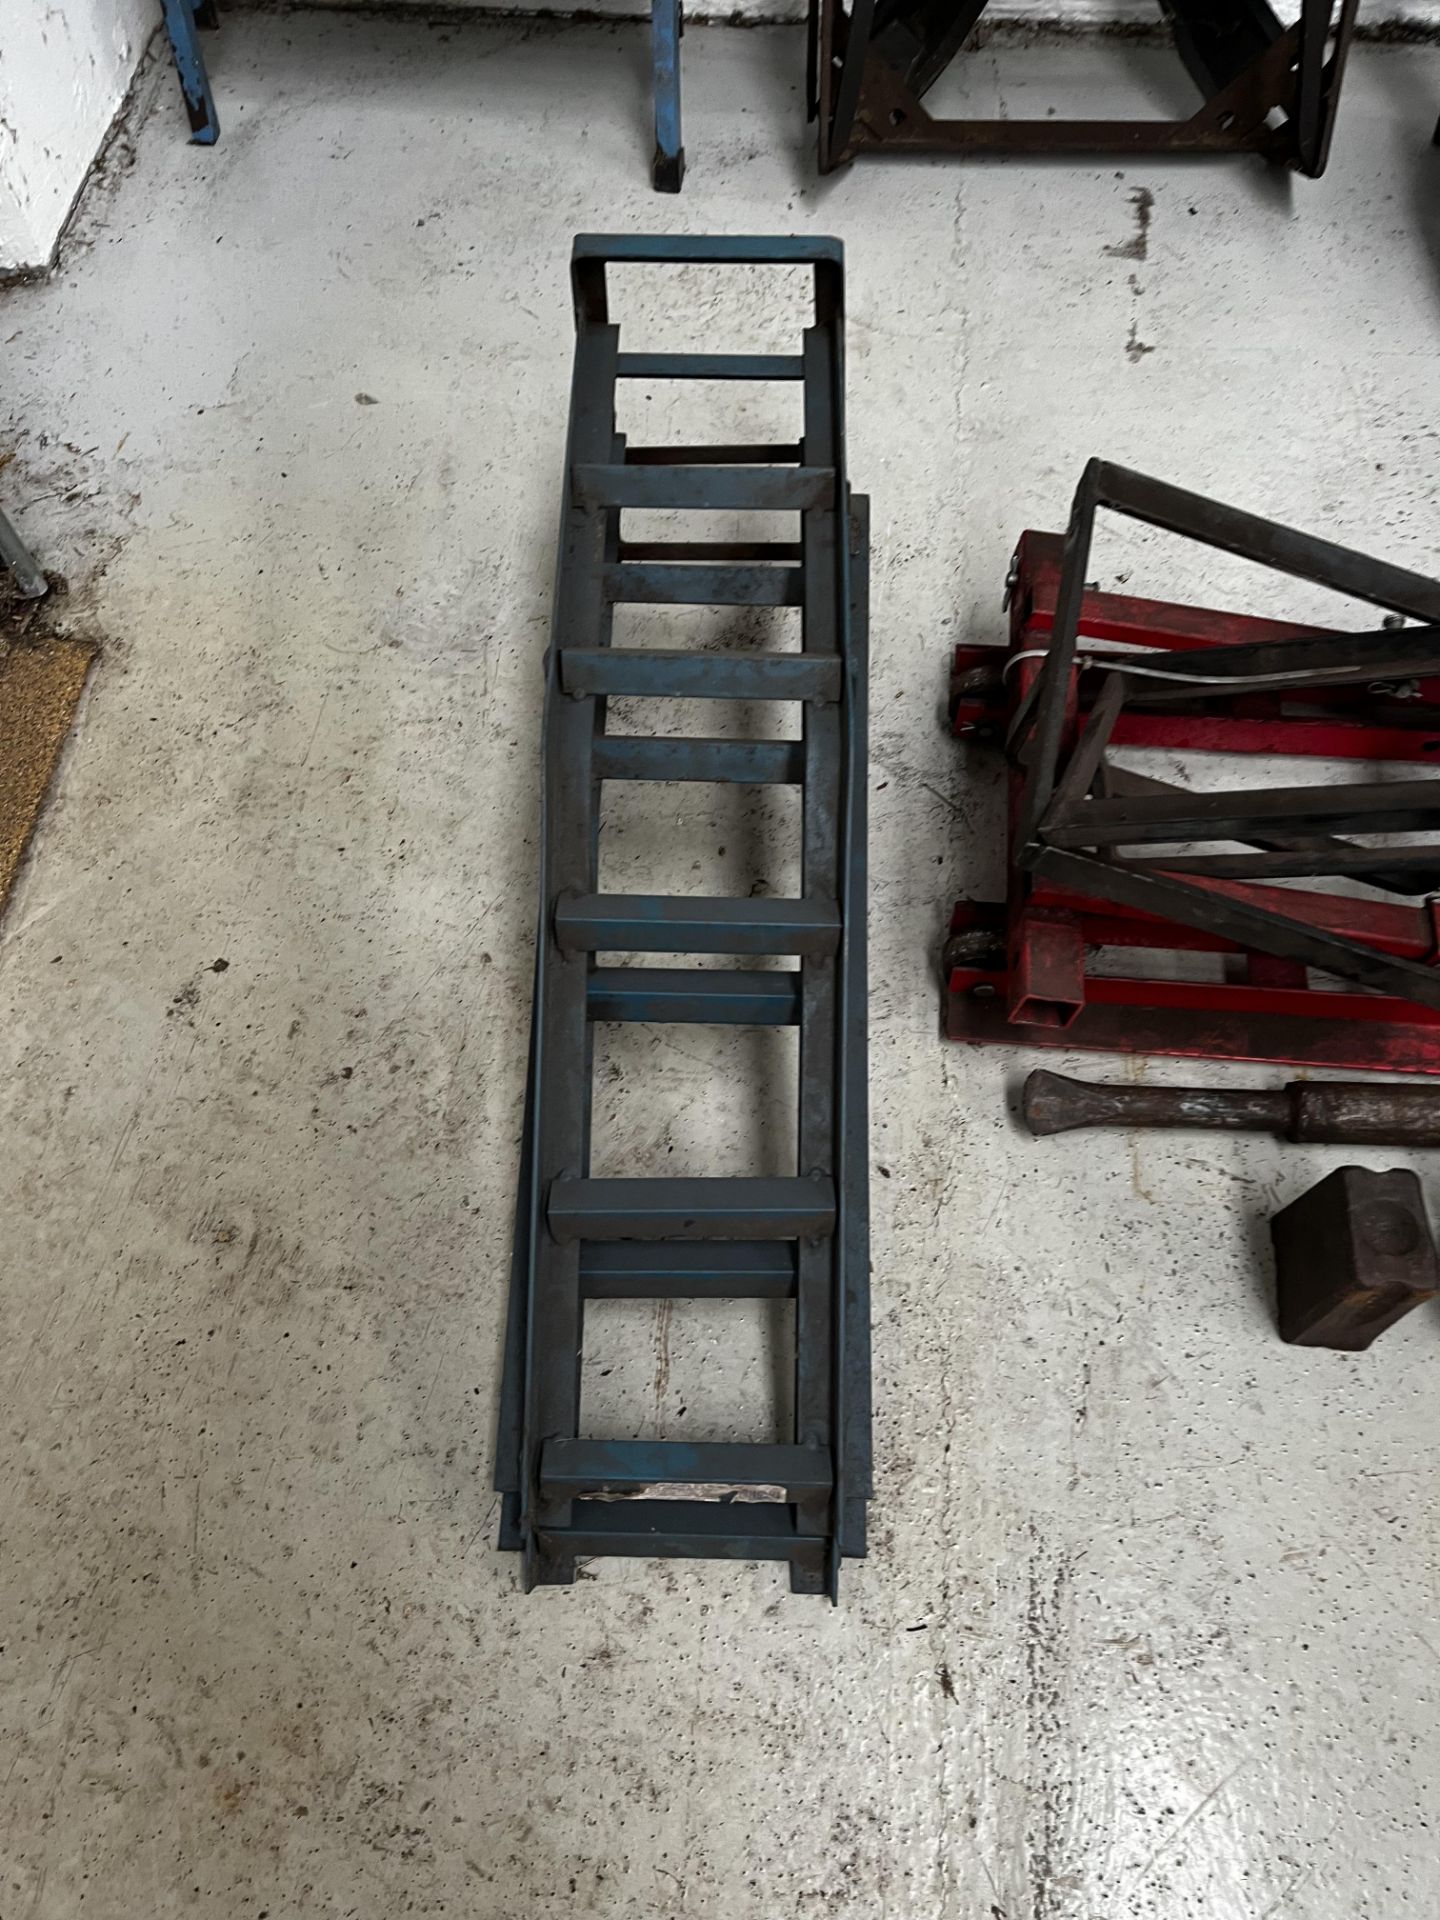 Hydraulic spectacle lift, trolley jack, pair of ramps - Image 2 of 4